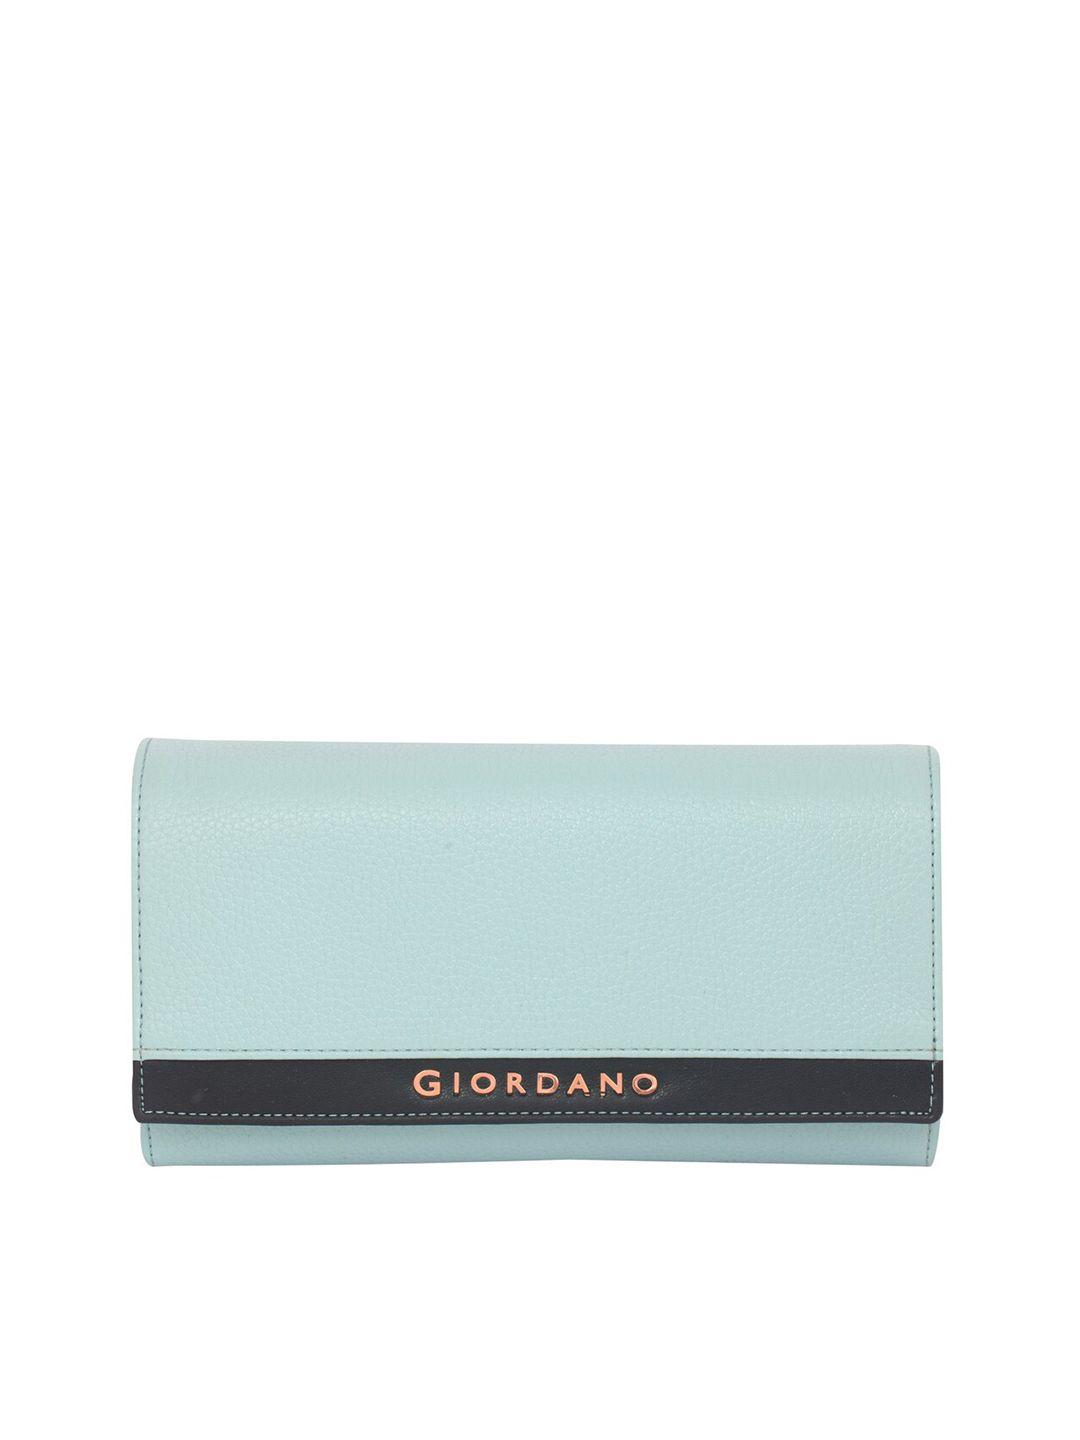 giordano women turquoise blue solid pu envelope